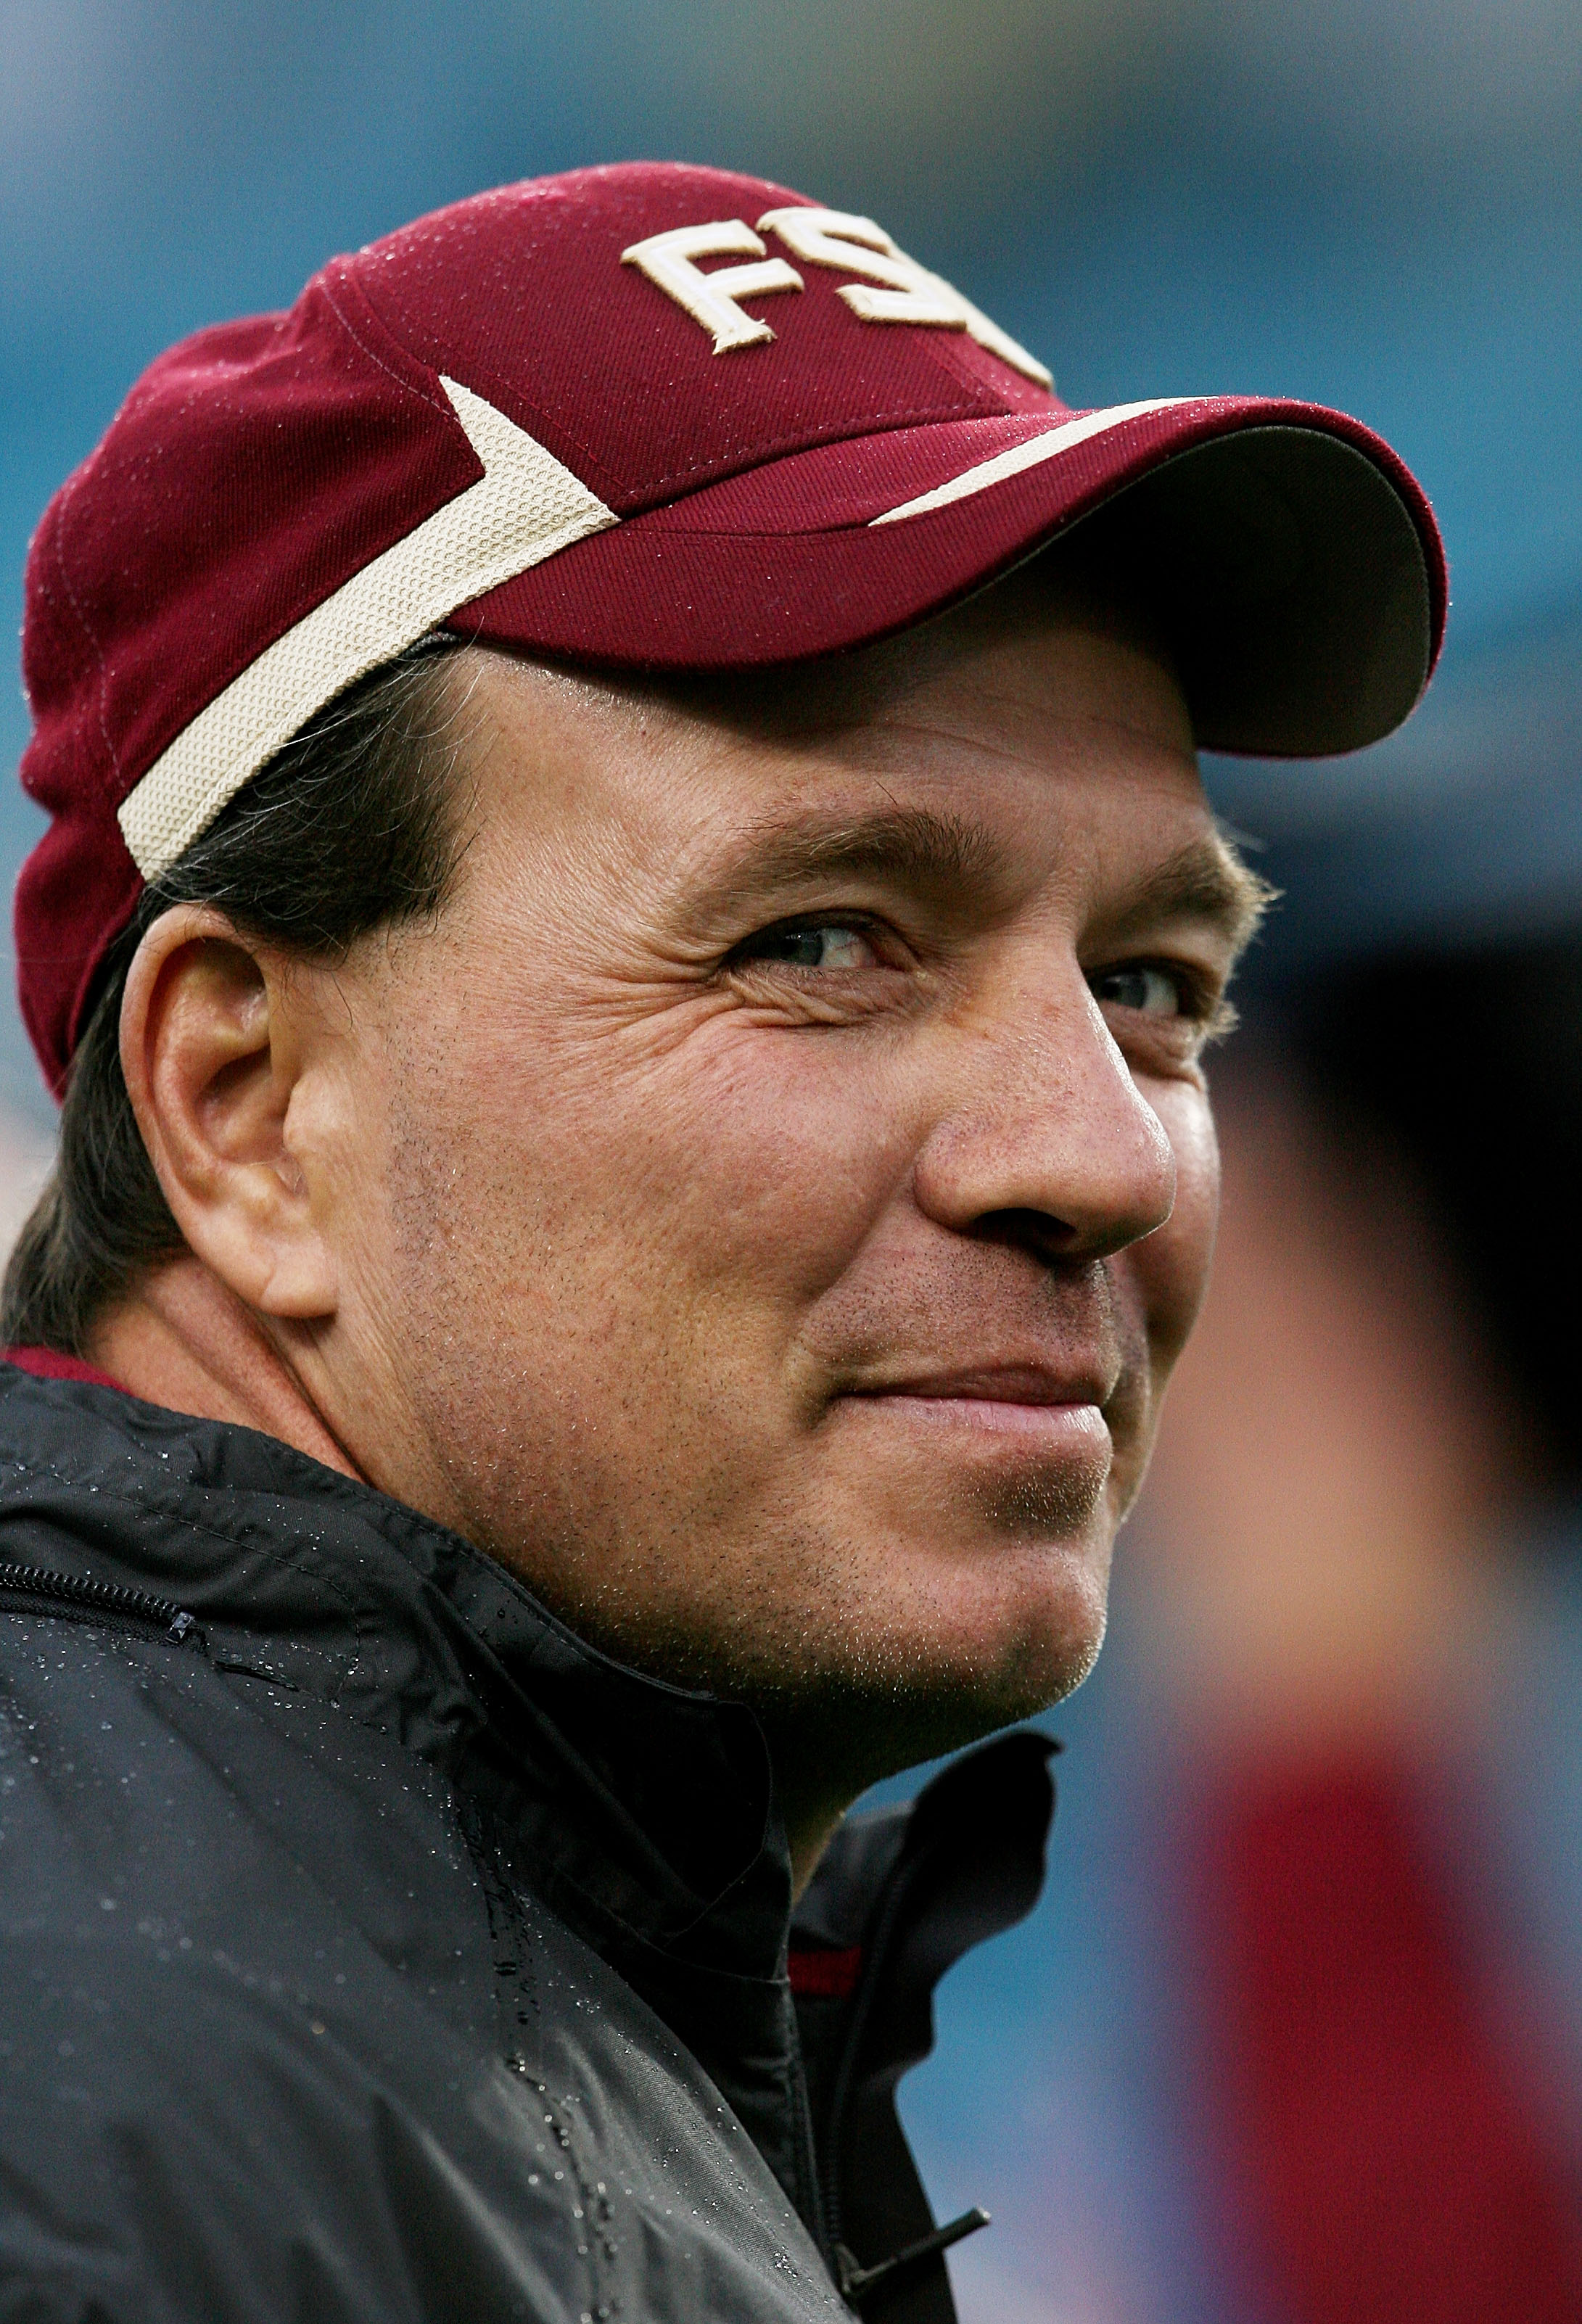 JACKSONVILLE, FL - JANUARY 01:  Offensive coordinator and future head coach Jimbo Fisher of the Florida State Seminoles walks the sidelines while taking on the West Virginia Mountaineers during the Konica Minolta Gator Bowl on January 1, 2010 at Jacksonvi